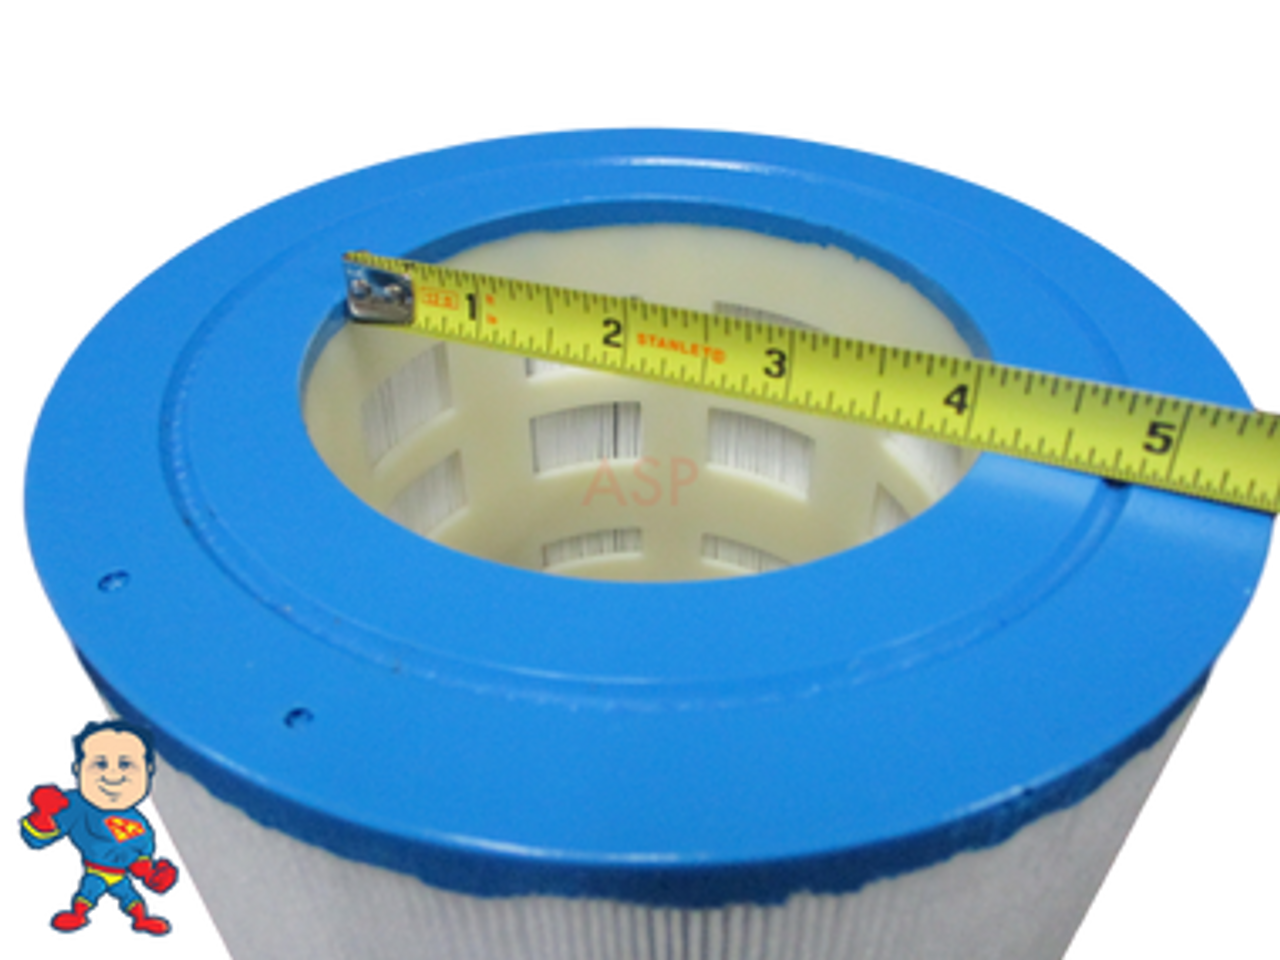 Filter Cartridge,  7 1/4"Tall x 7" Across 4" Hole Master Spa Down East 2002-2003